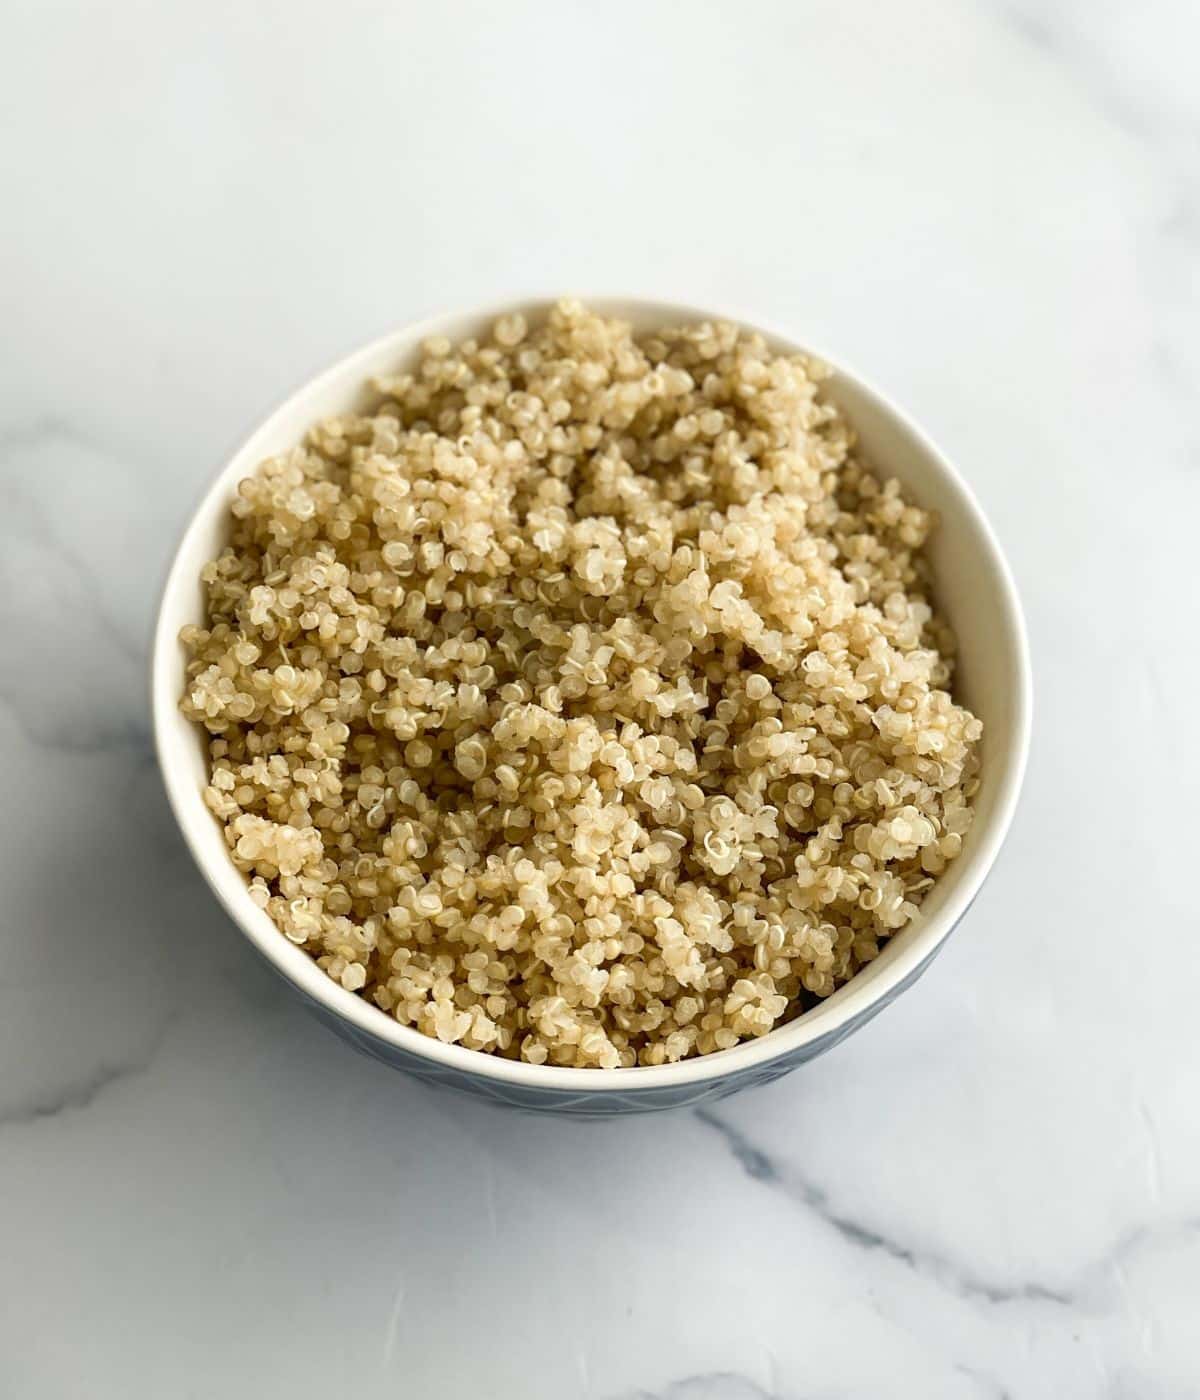 A bowl of quinoa is on the surface.